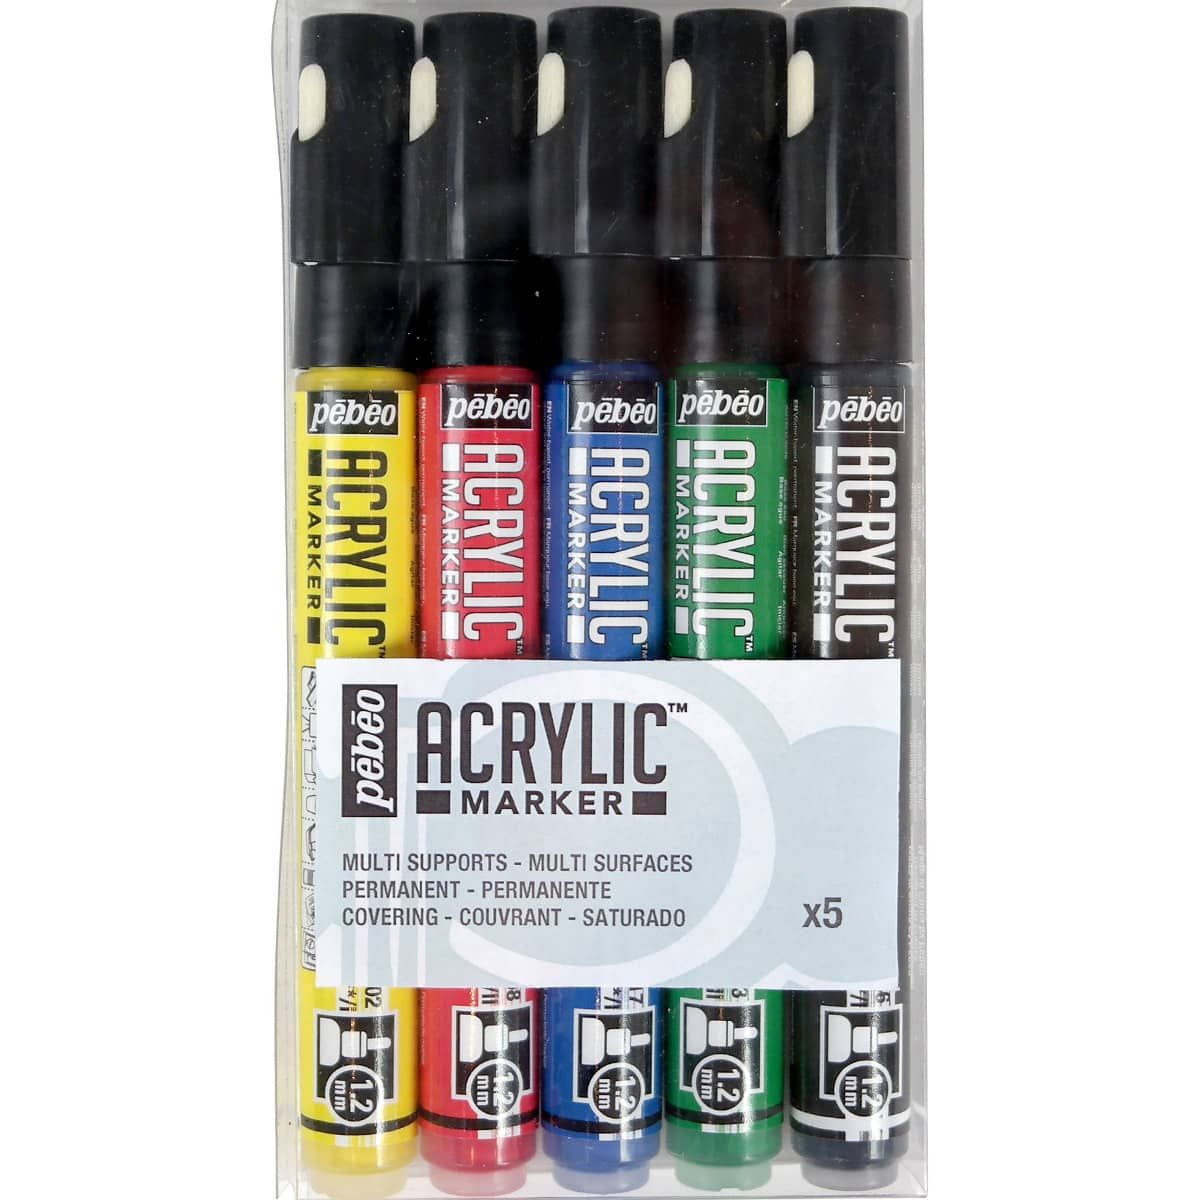 Acrylic Marker Set of 5 with a 1.2 mm tip in Black, Yellow, Red, Blue, and Green.